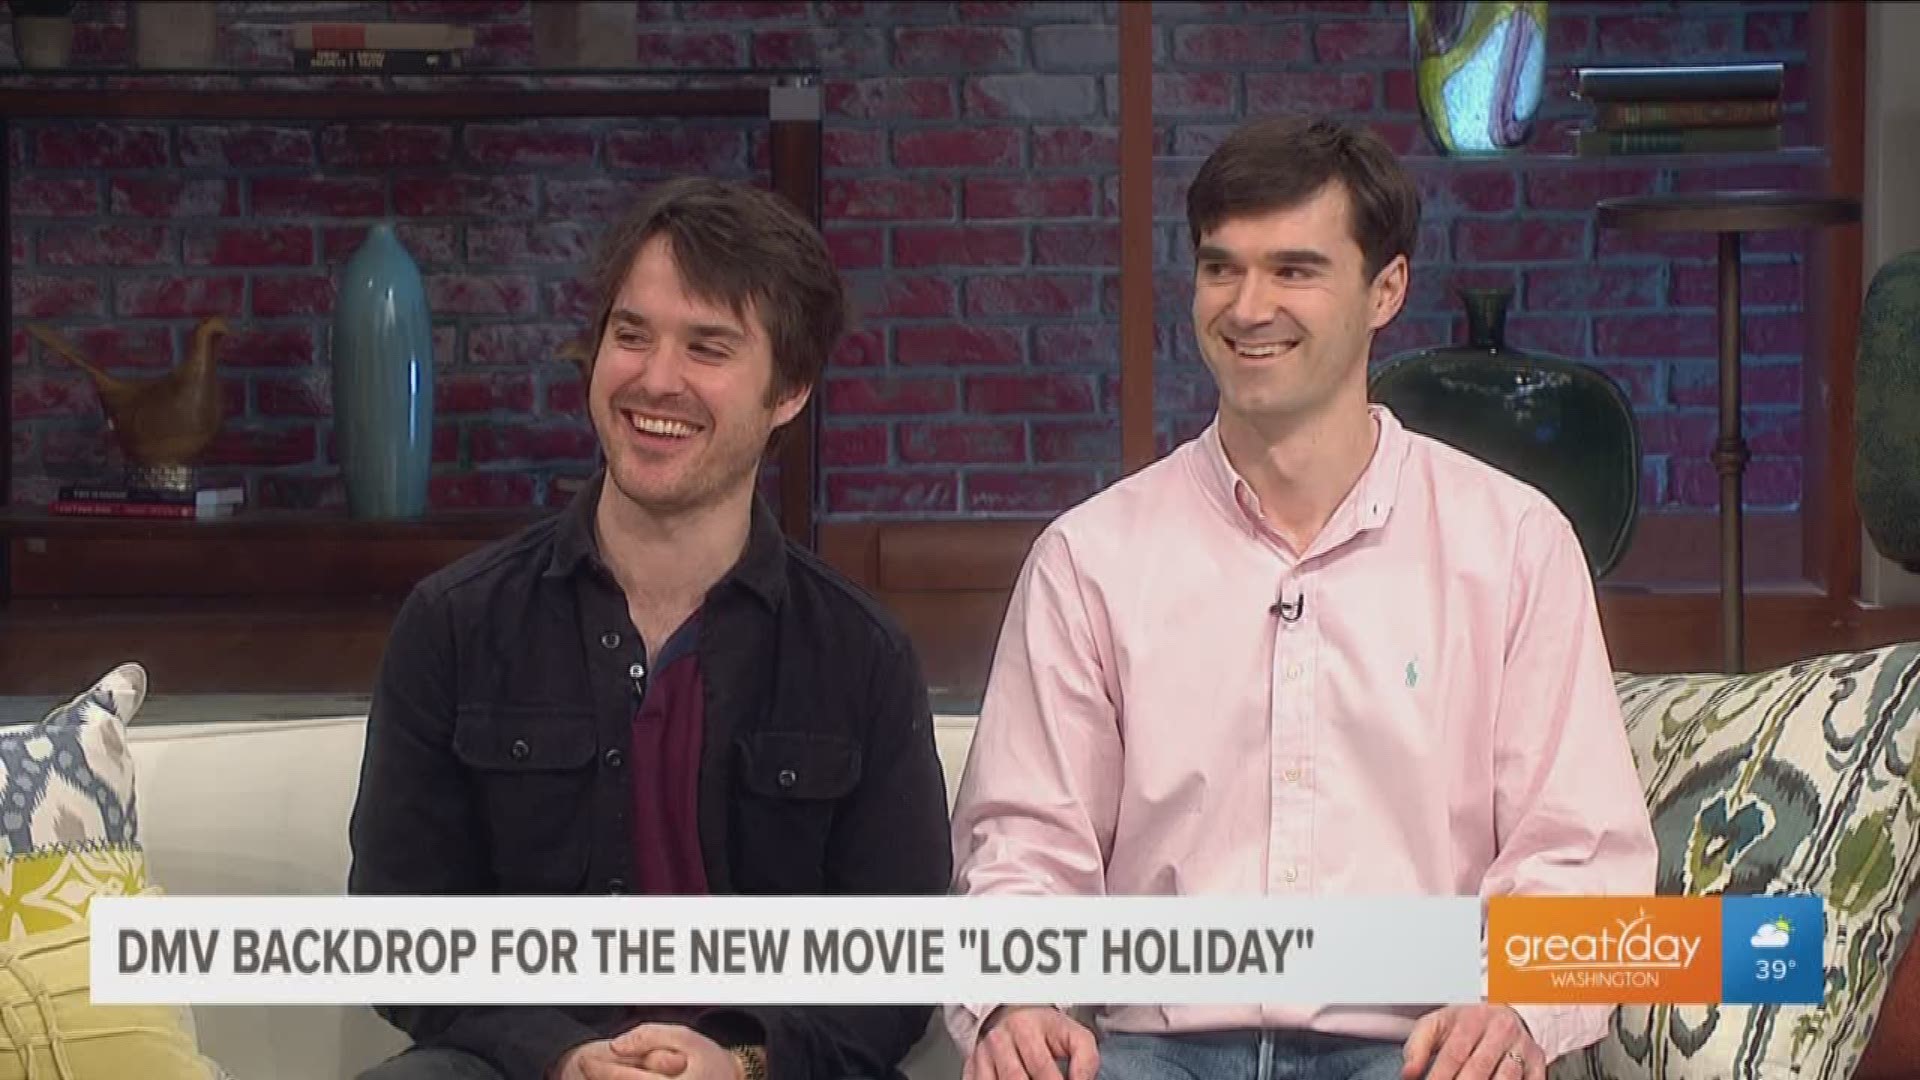 Thomas and Michael Matthews have released a new movie, 'Lost Holiday' based coming home for the holidays right here in Washington, DC.